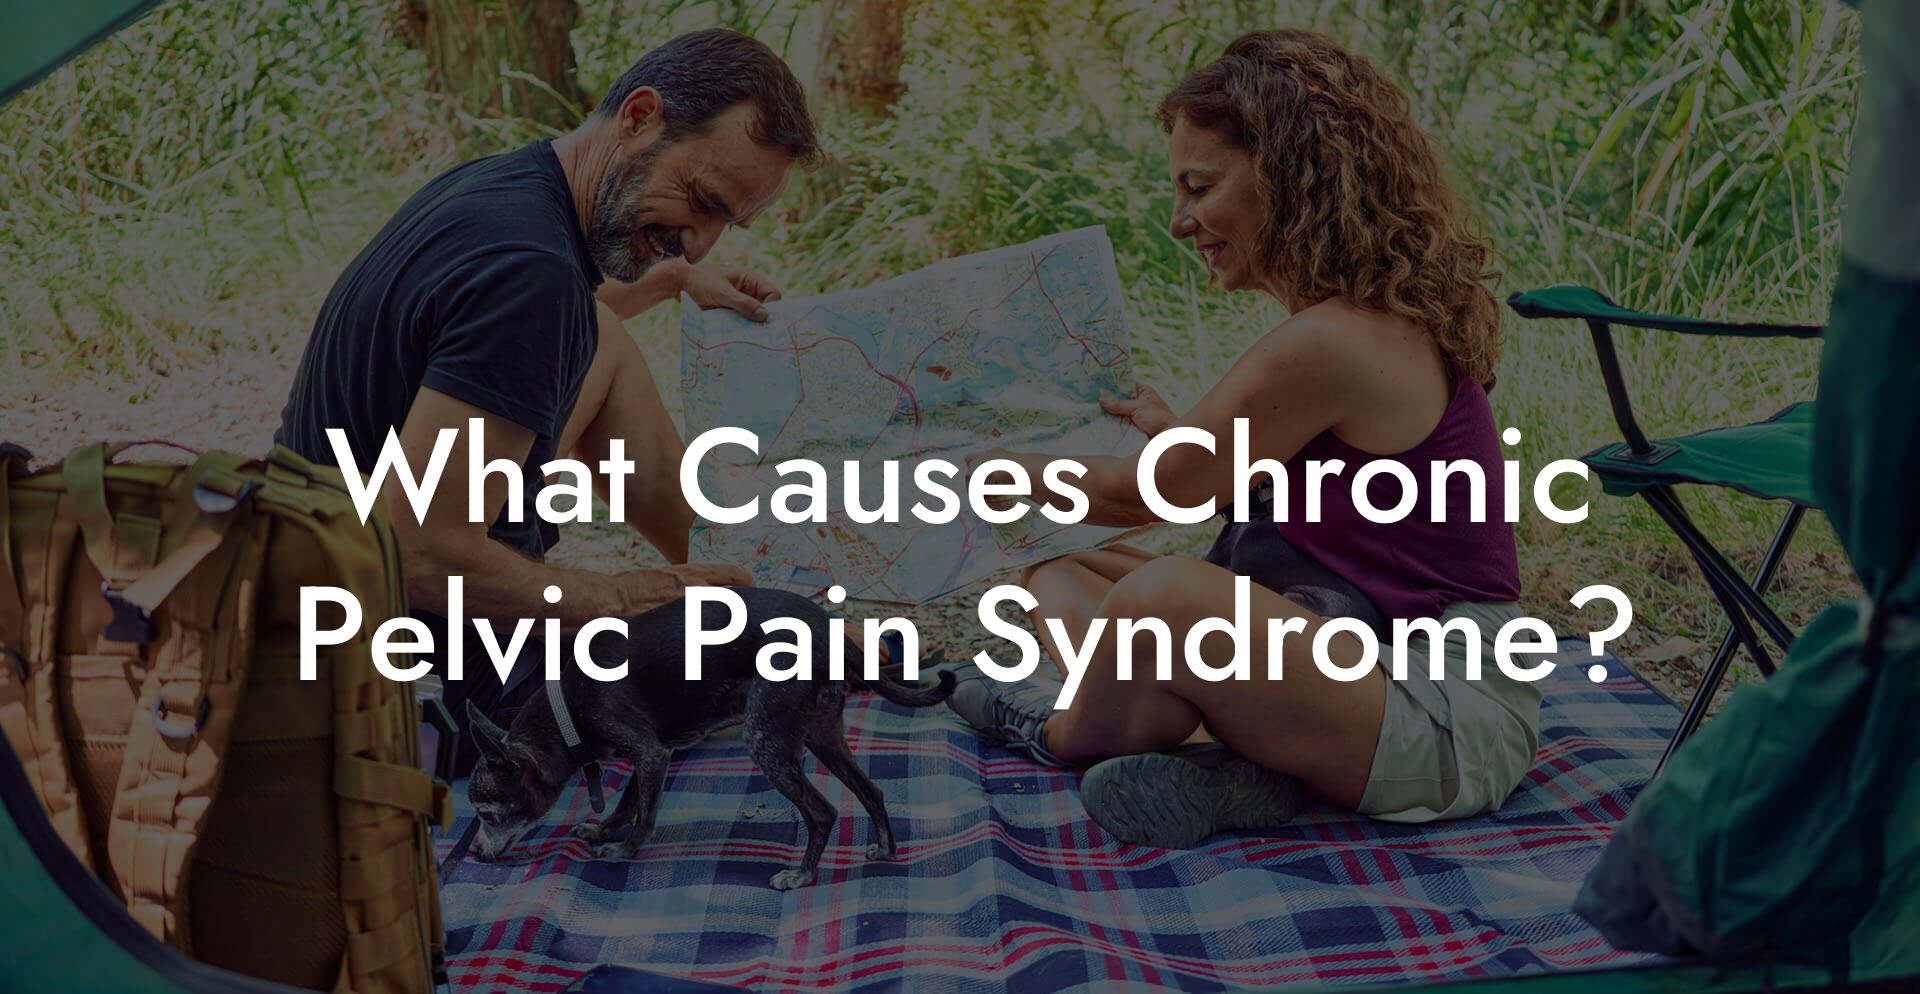 What Causes Chronic Pelvic Pain Syndrome?